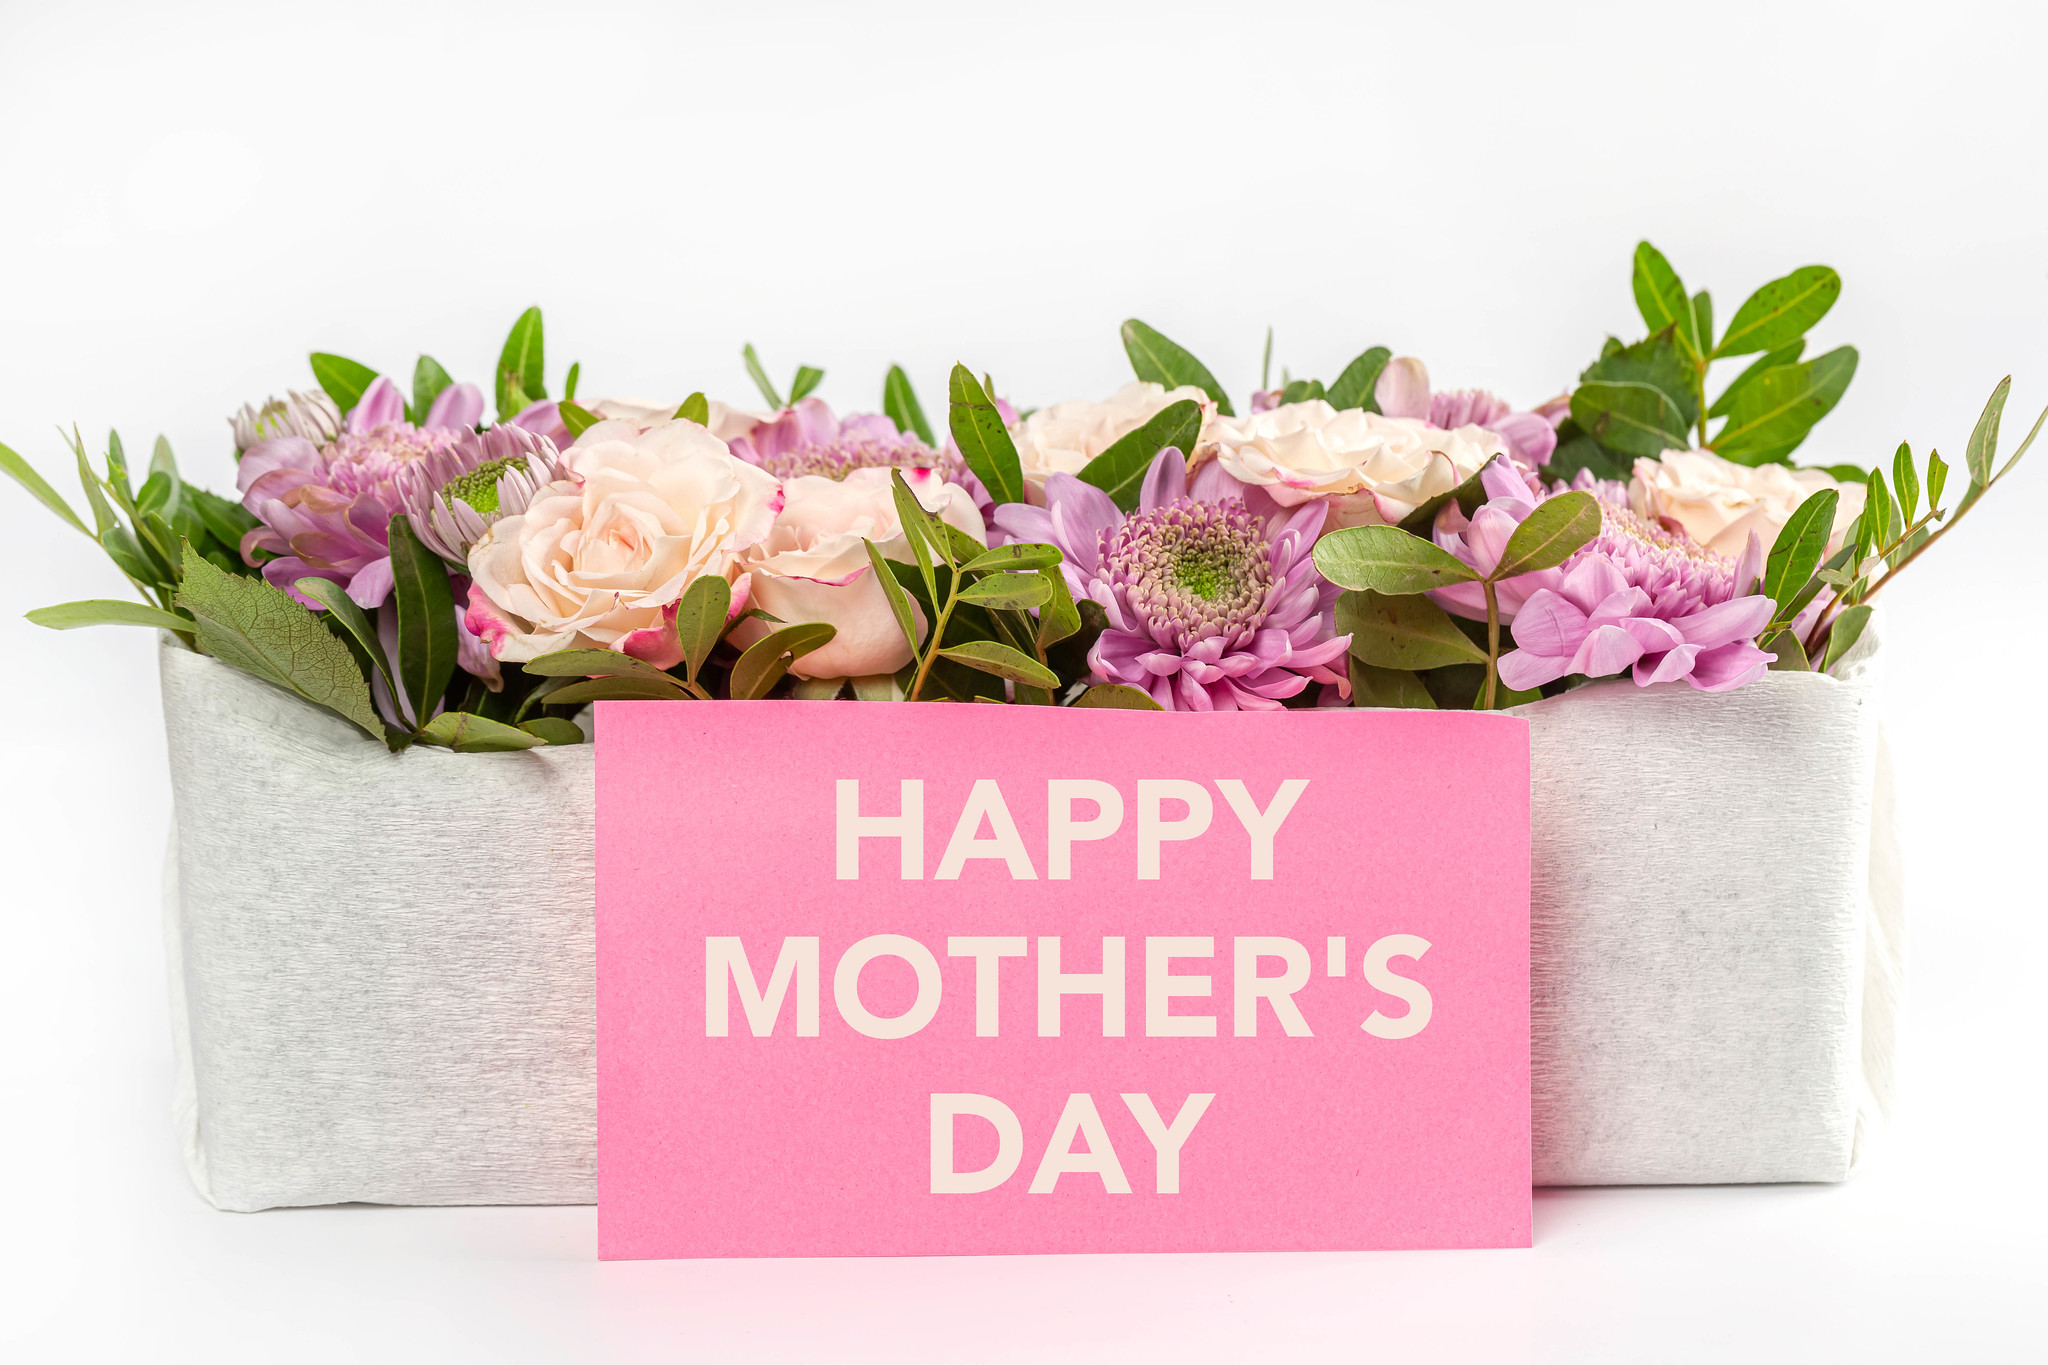 diy mother's day gifts by Marco Verch Professional Photographer on Flickr